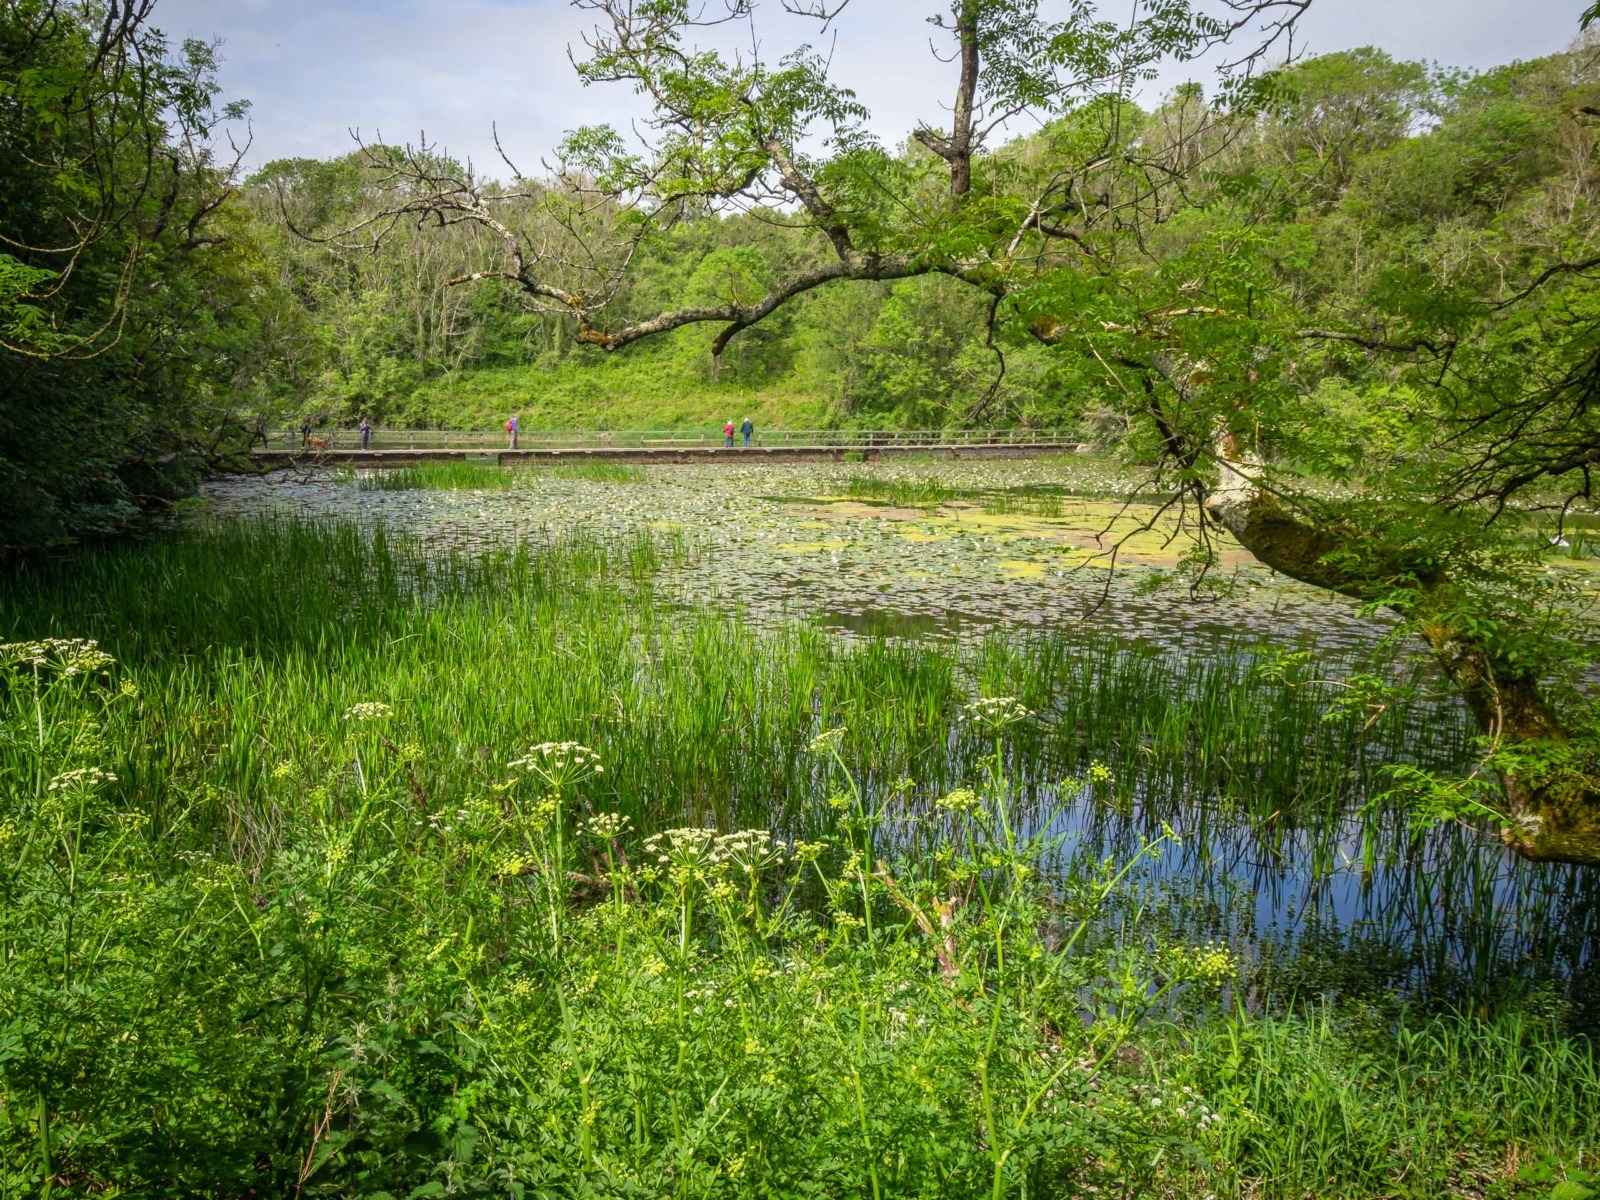 Bosherston lily pools in south Wales